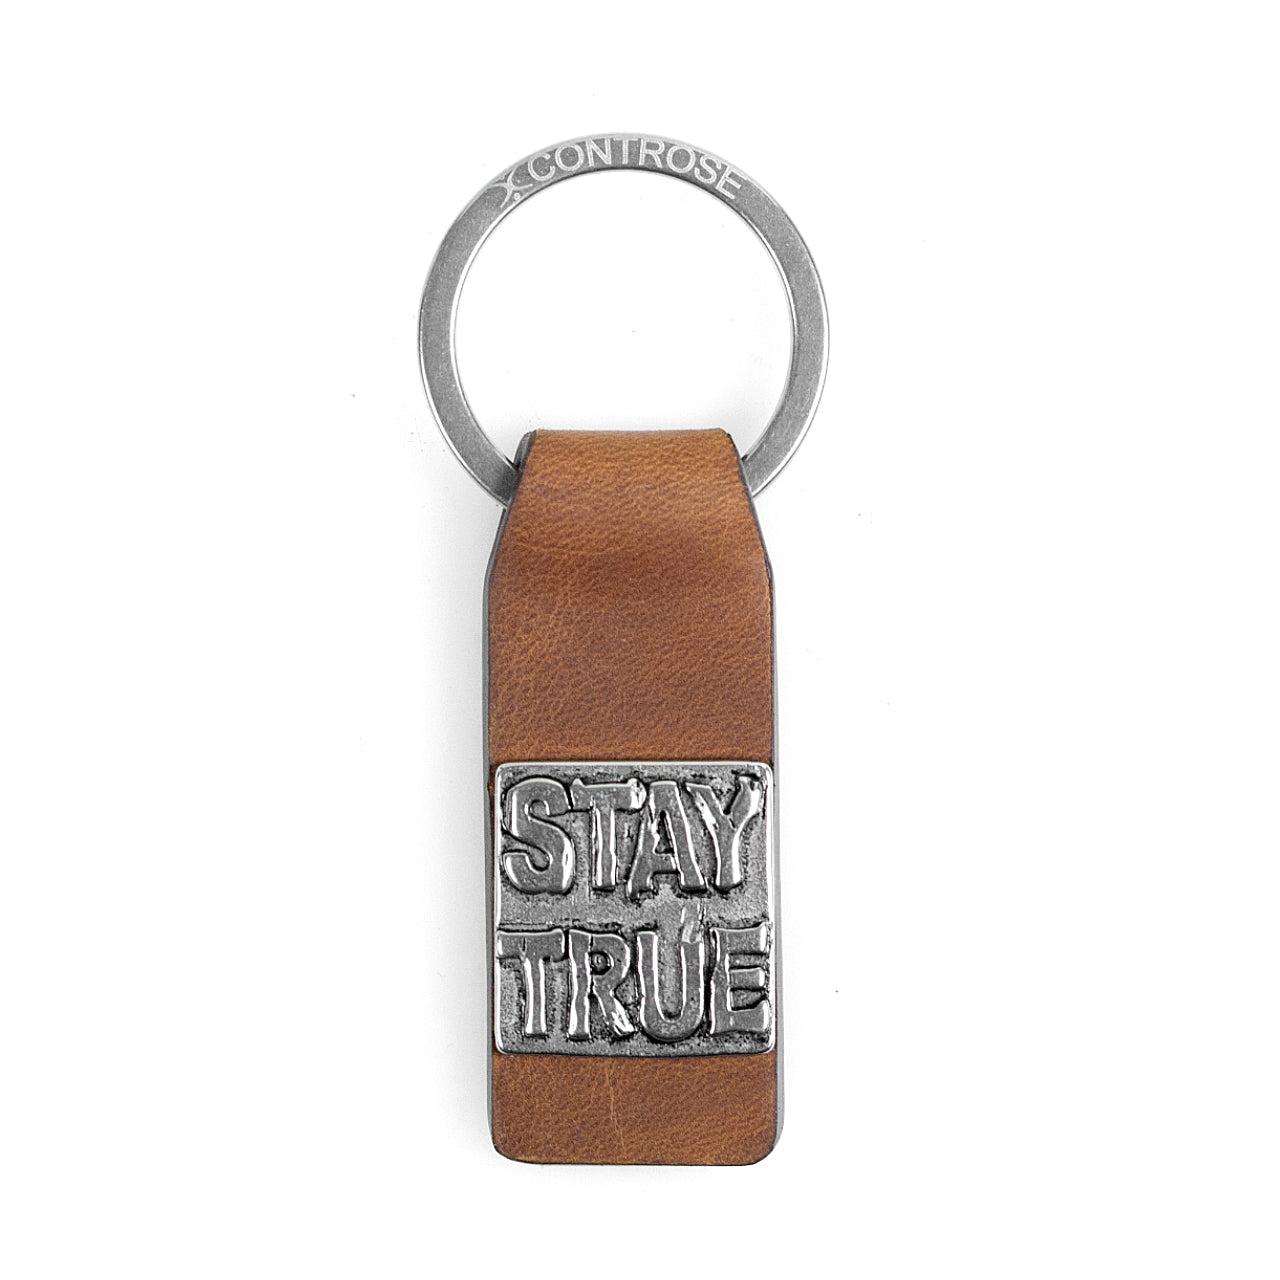 "Stay True" Leather Keychain - Reminder to Stay True to Yourself
This chic keychain features a light brown leather strap and a stainless steel ring with the Controse logo. The stainless steel plate on the strap is etched with the words "Stay True" Bijou Her